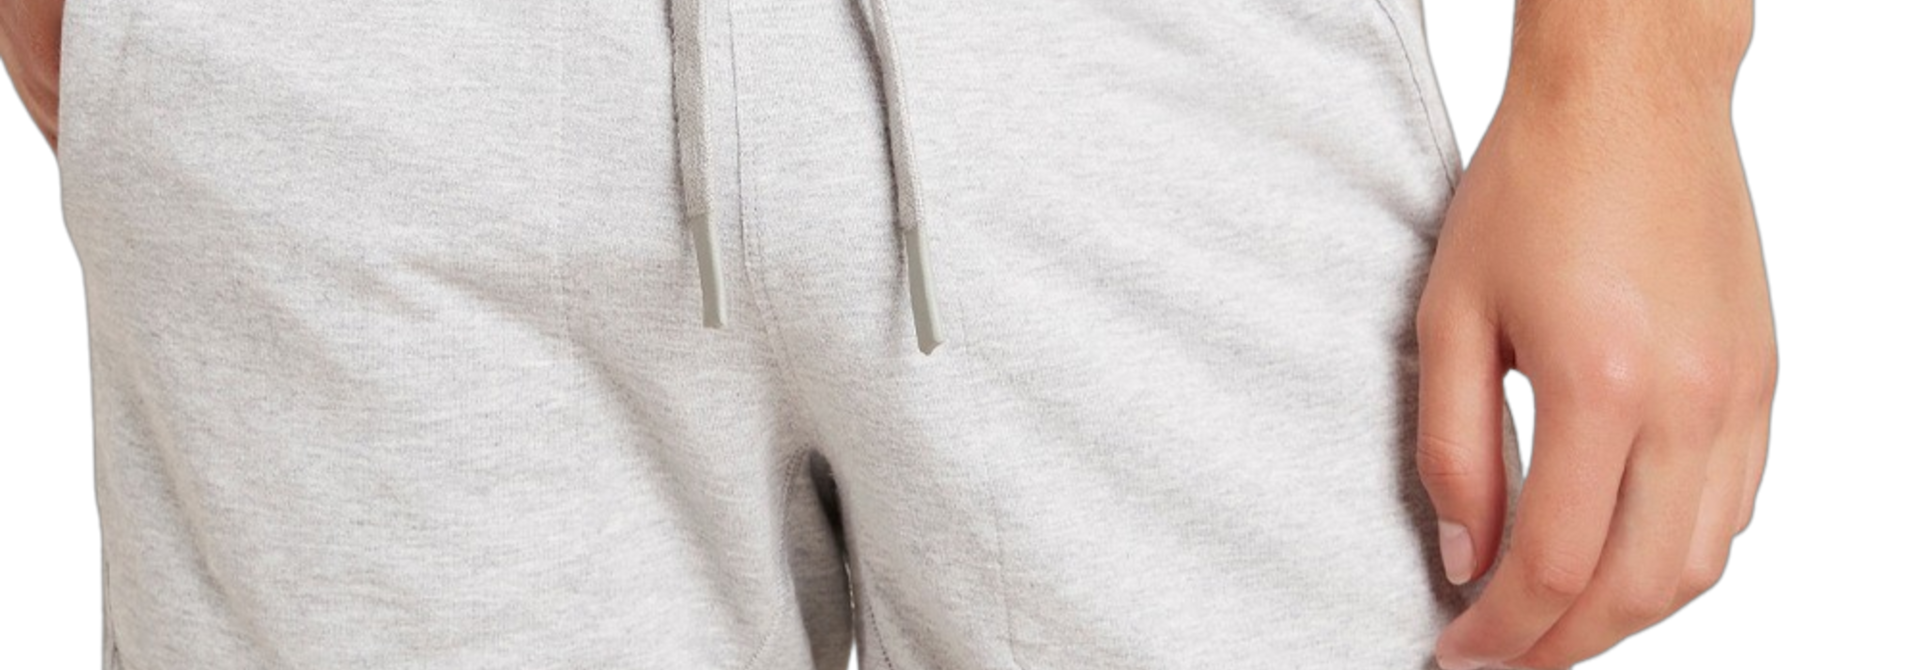 Weekend Sweat Shorts | The Men's Loungewear Collection, Grey Marl -